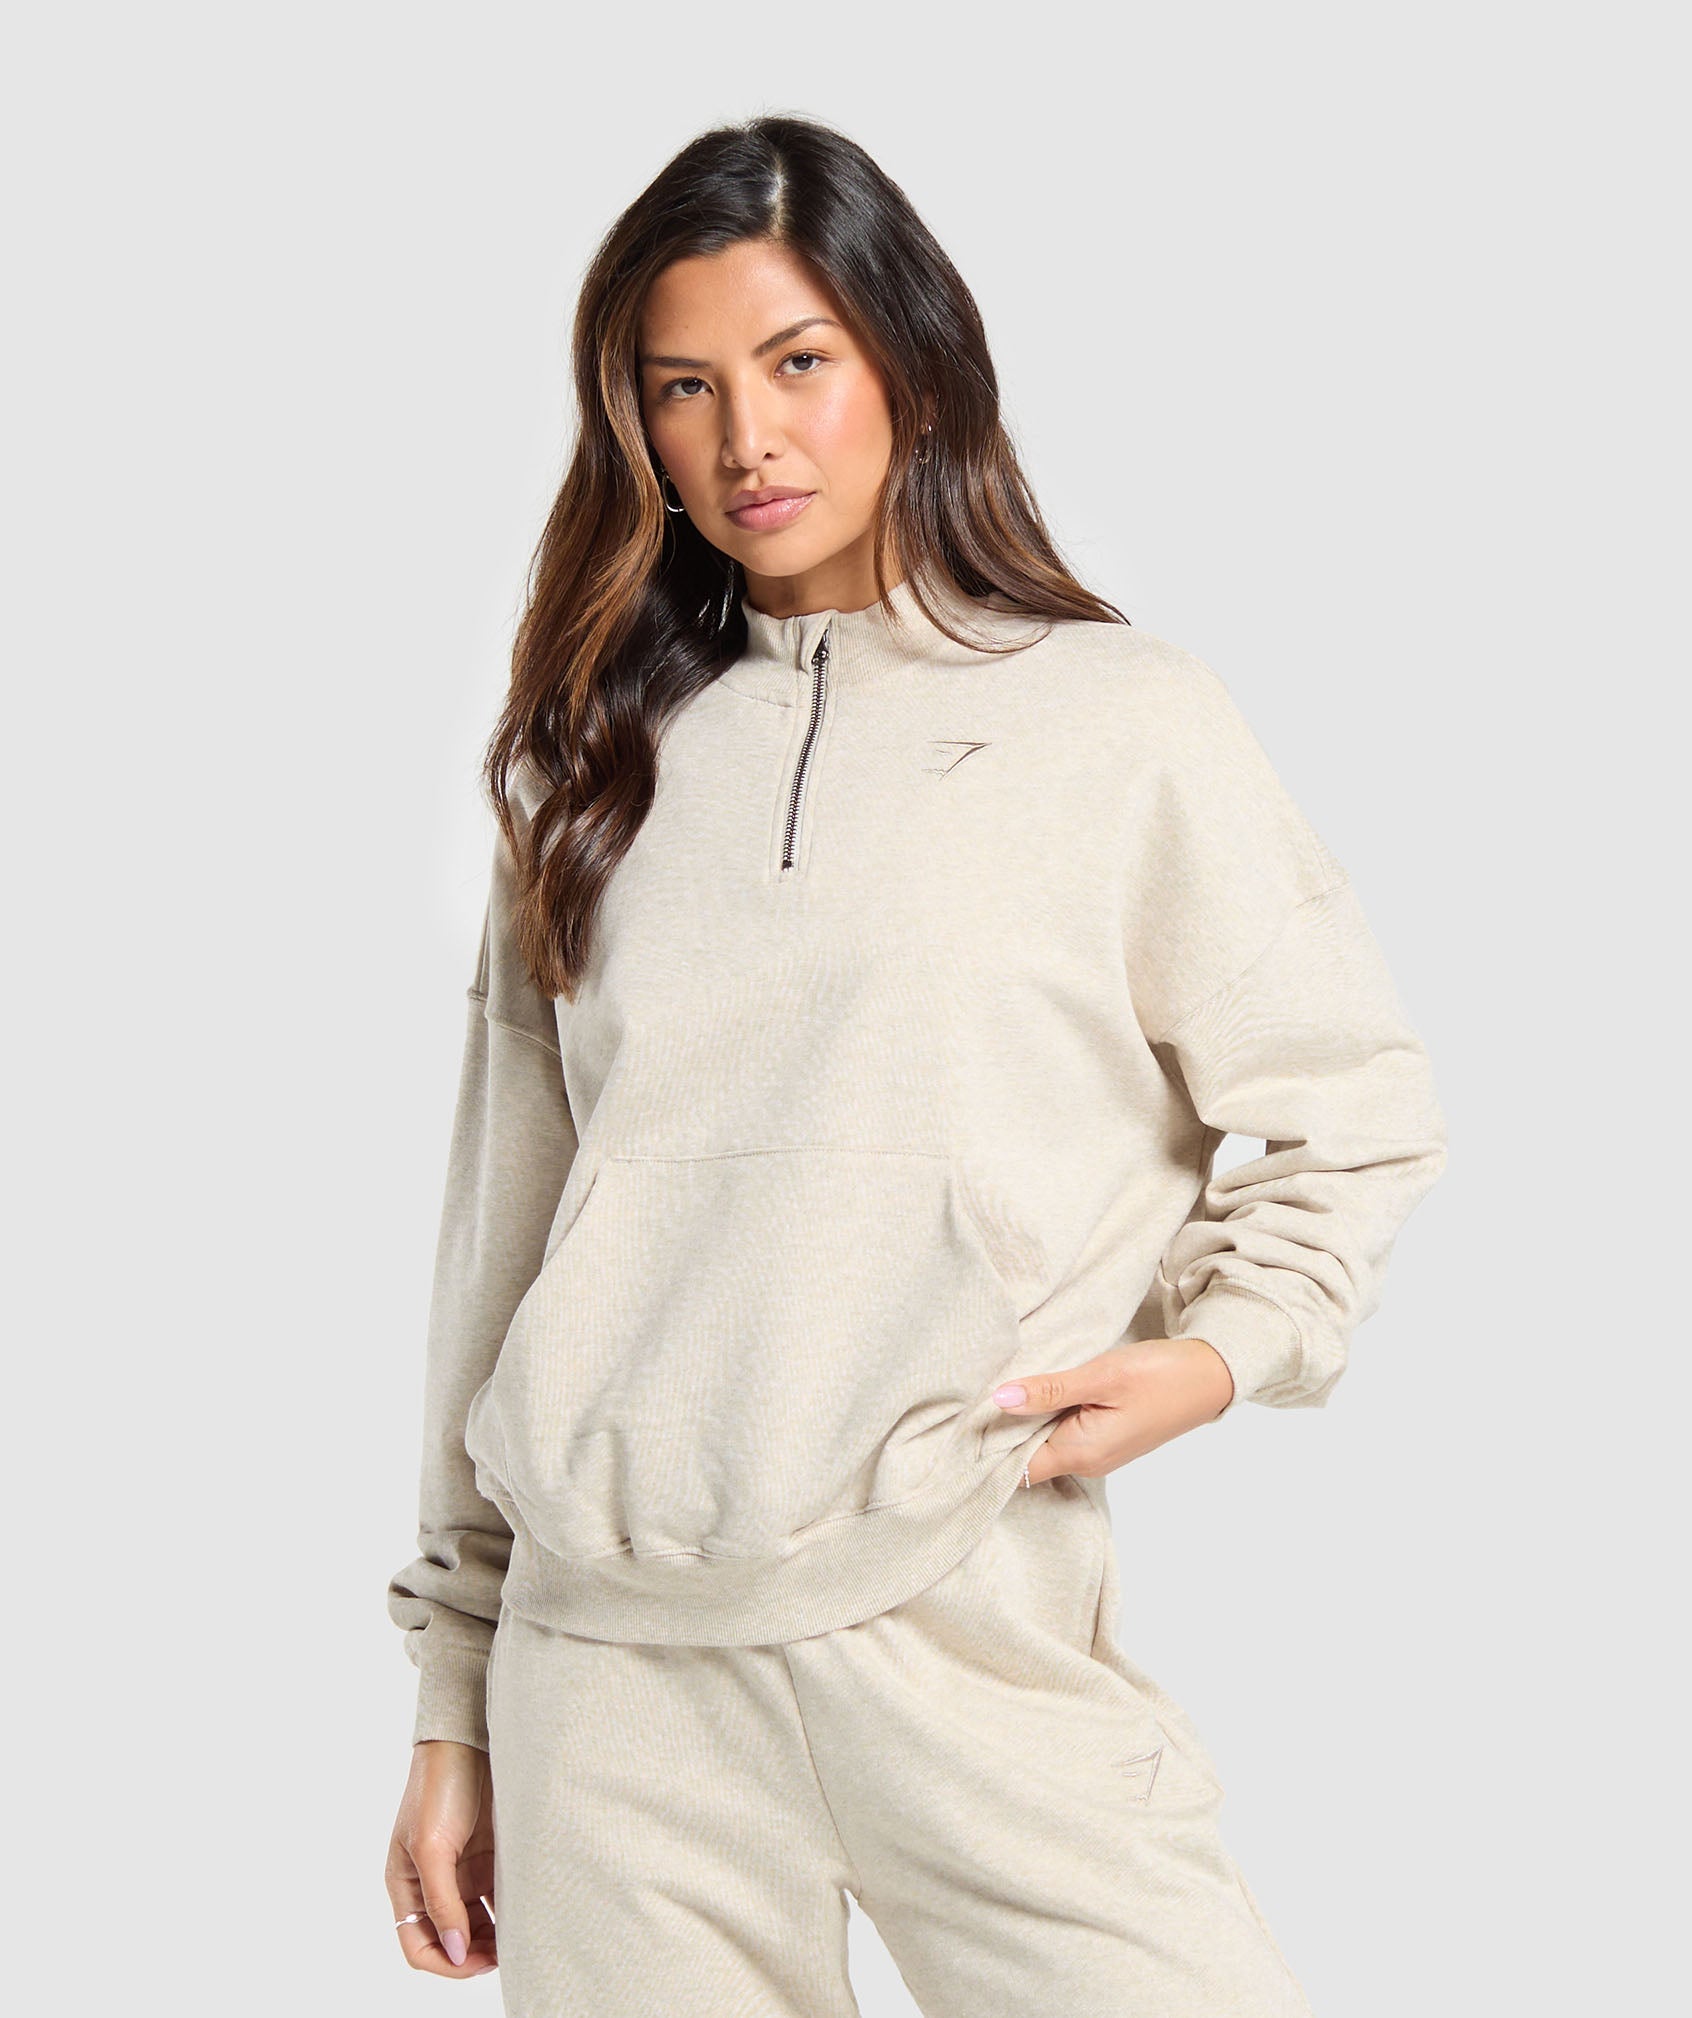 Rest Day Sweats 1/2 Zip Pullover